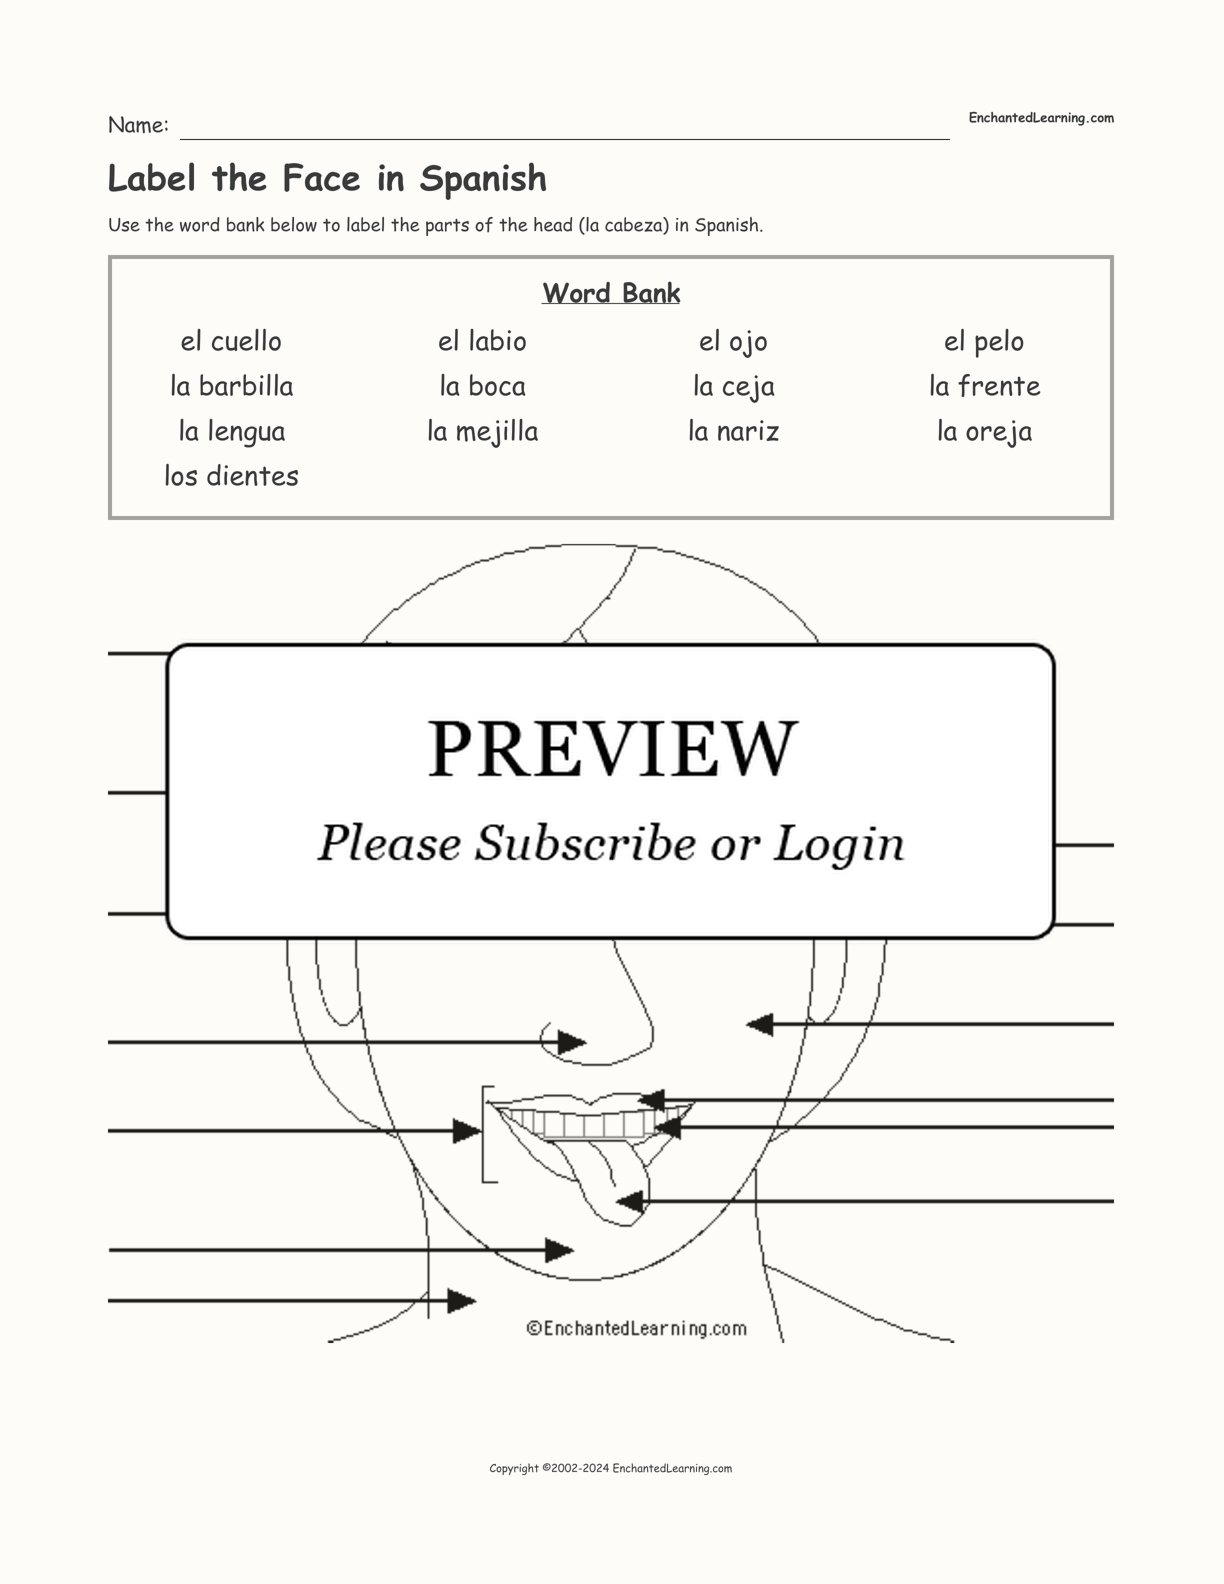 Label the Face in Spanish interactive worksheet page 1